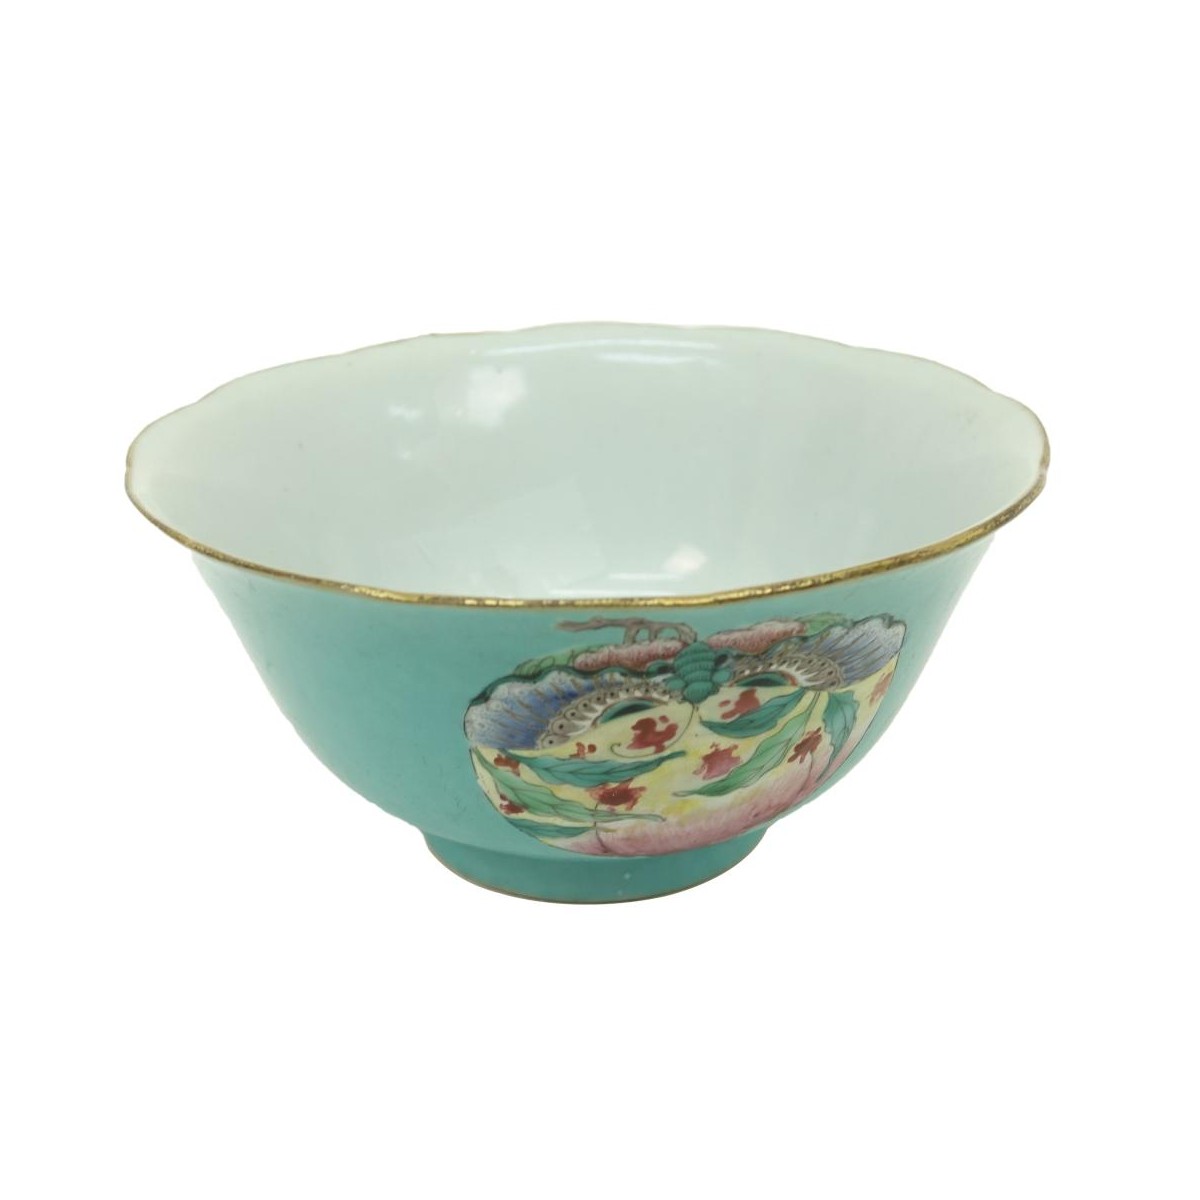 Antique Chinese Turquoise Ground Porcelain Bowl